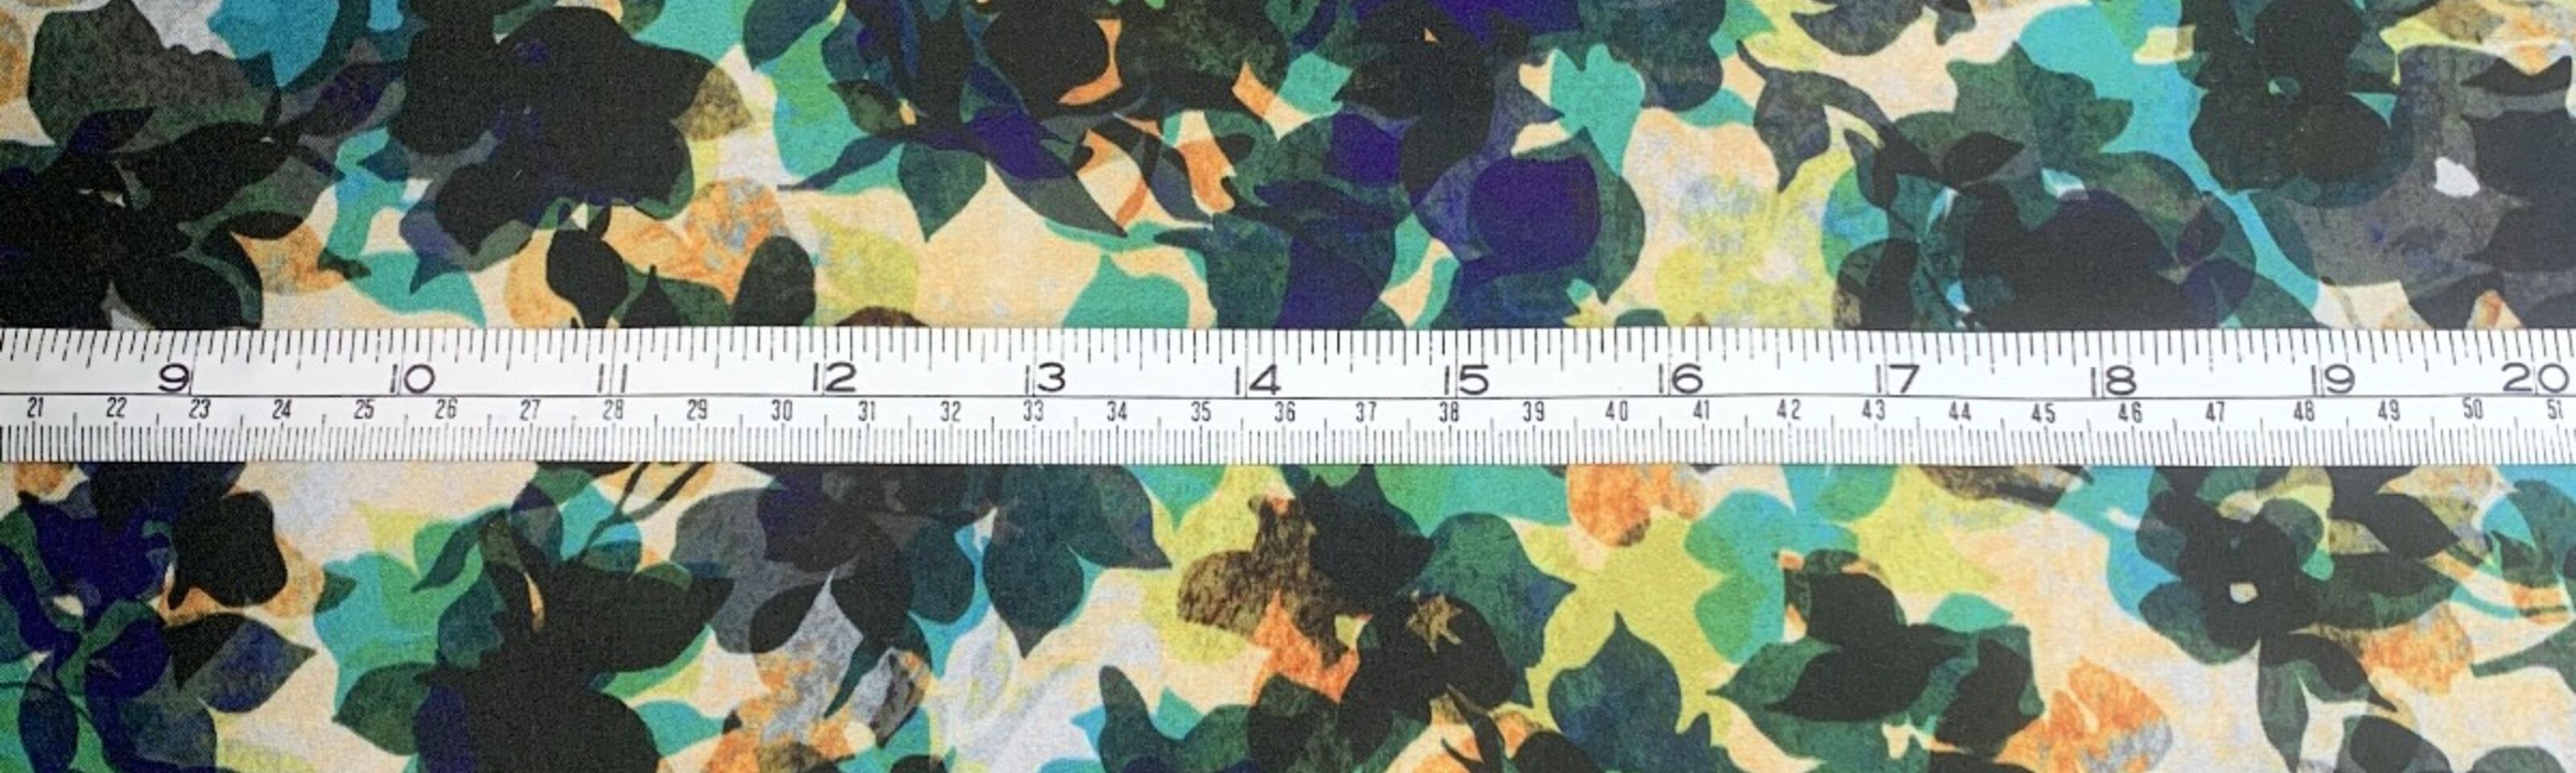 Soft Shell - Autumn Leaves - Green Floral Abstract Lightweight Jacketing Fabric - Scale